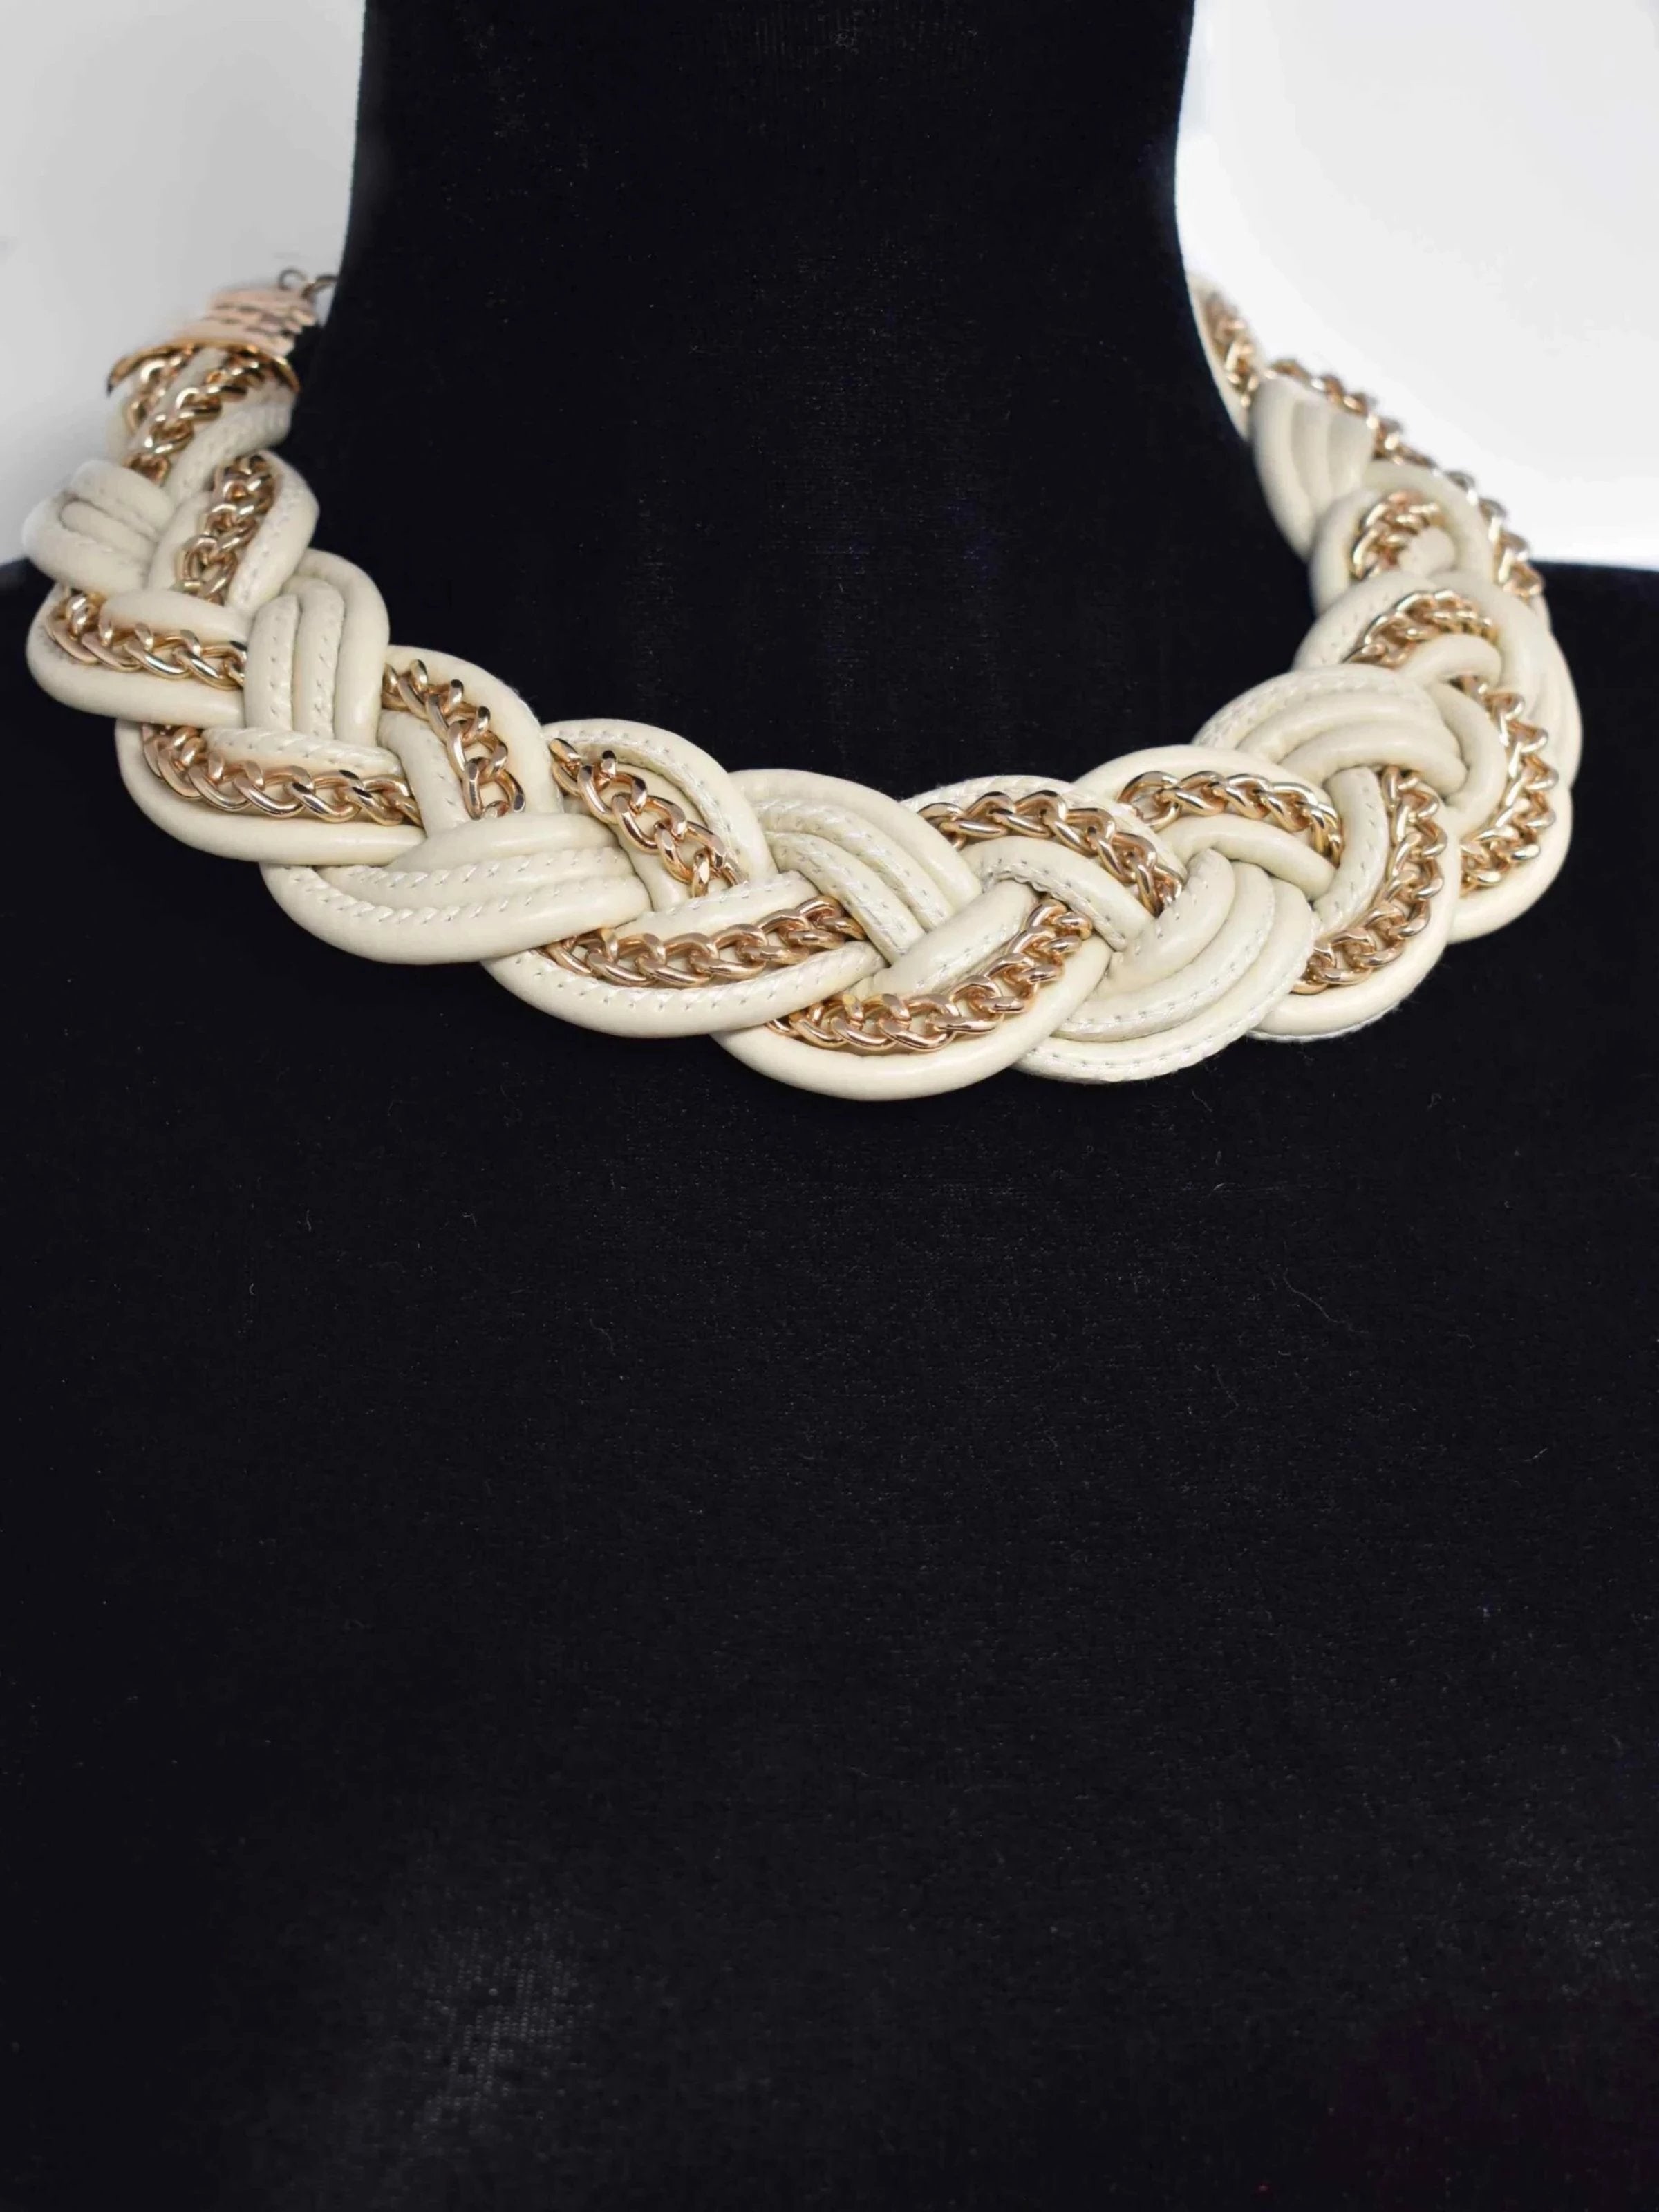 Get all the attention in the Agera statement necklace. This cream braided necklace is accented with gold chain trimming for a unique design. It messures 18" in length and has a lobster clasp.